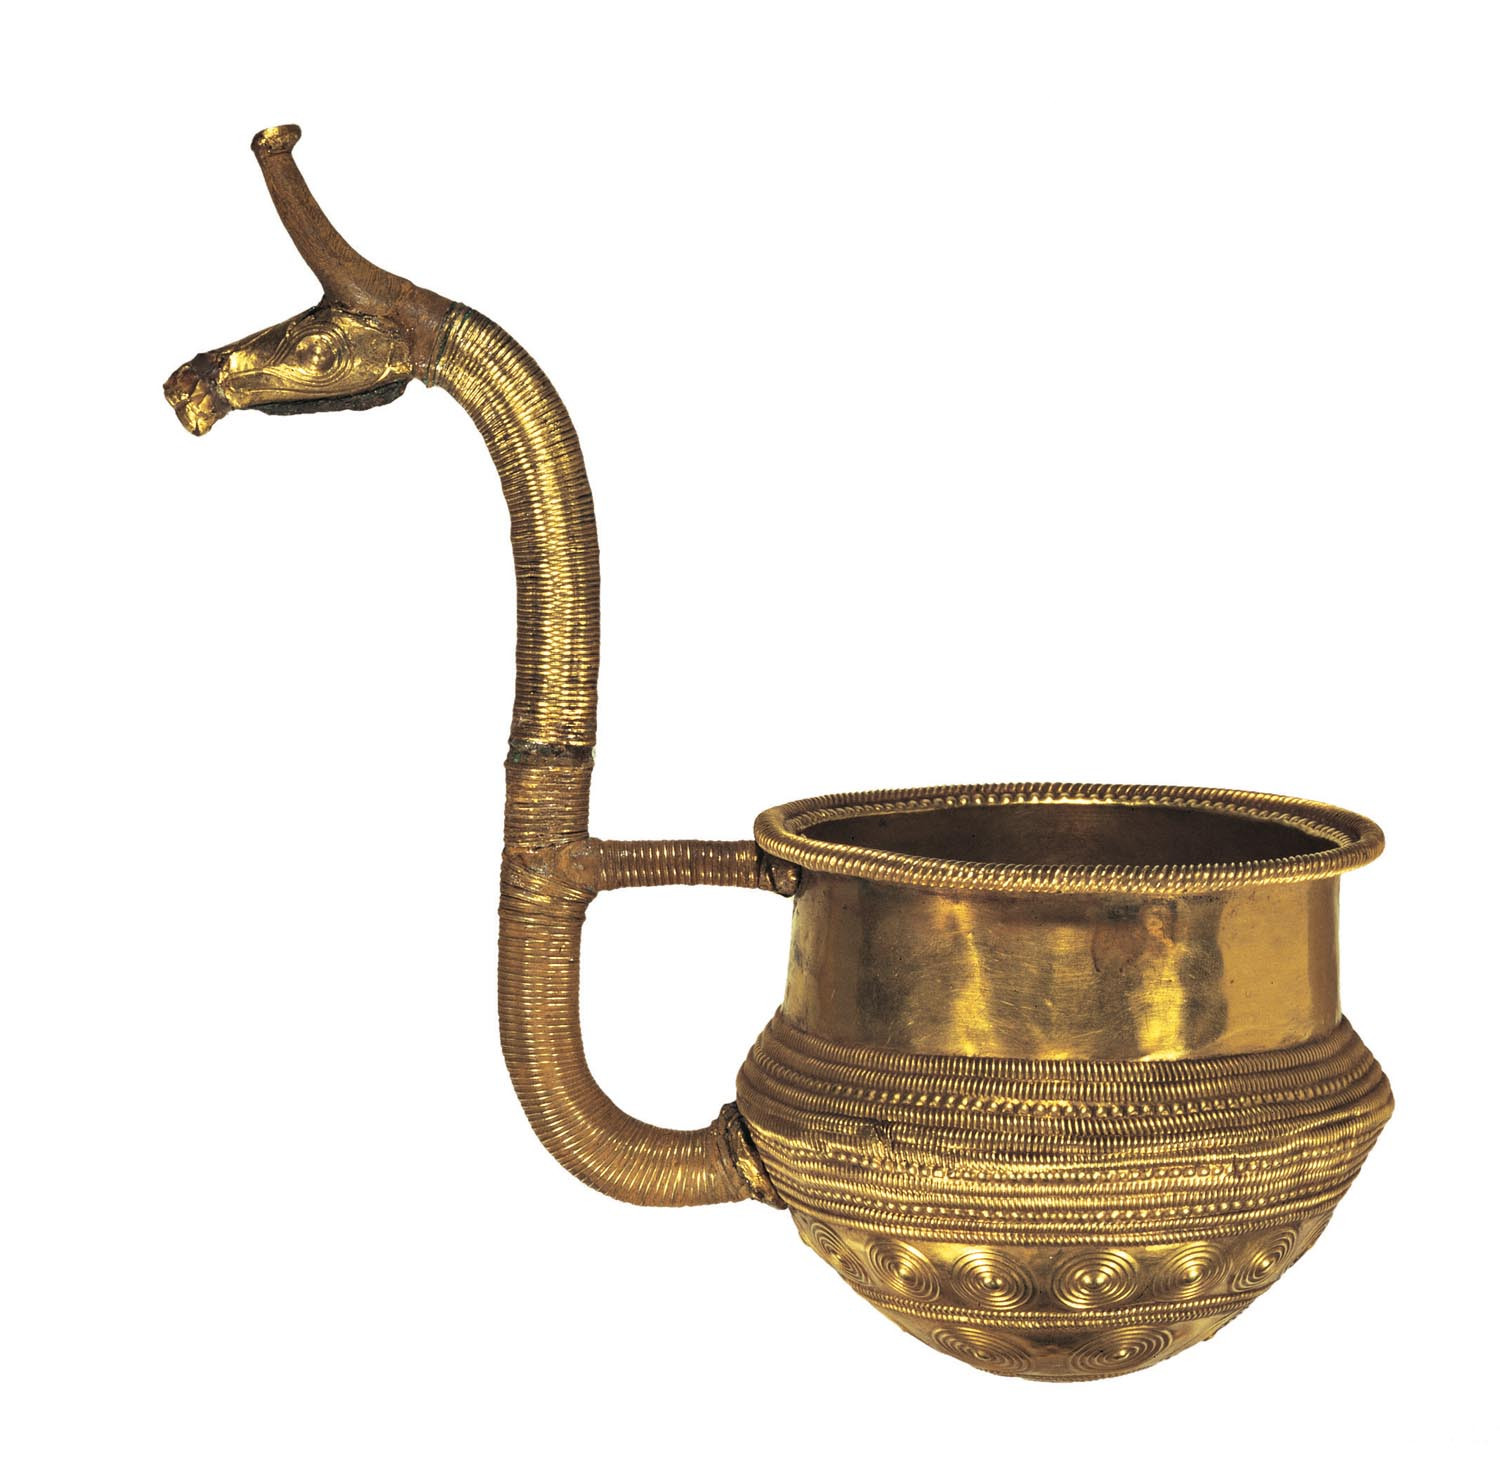 Bronze Age Dipper Cup, c. 800 BC, National Museum, Copenhagen. From 30,000 Years of Art